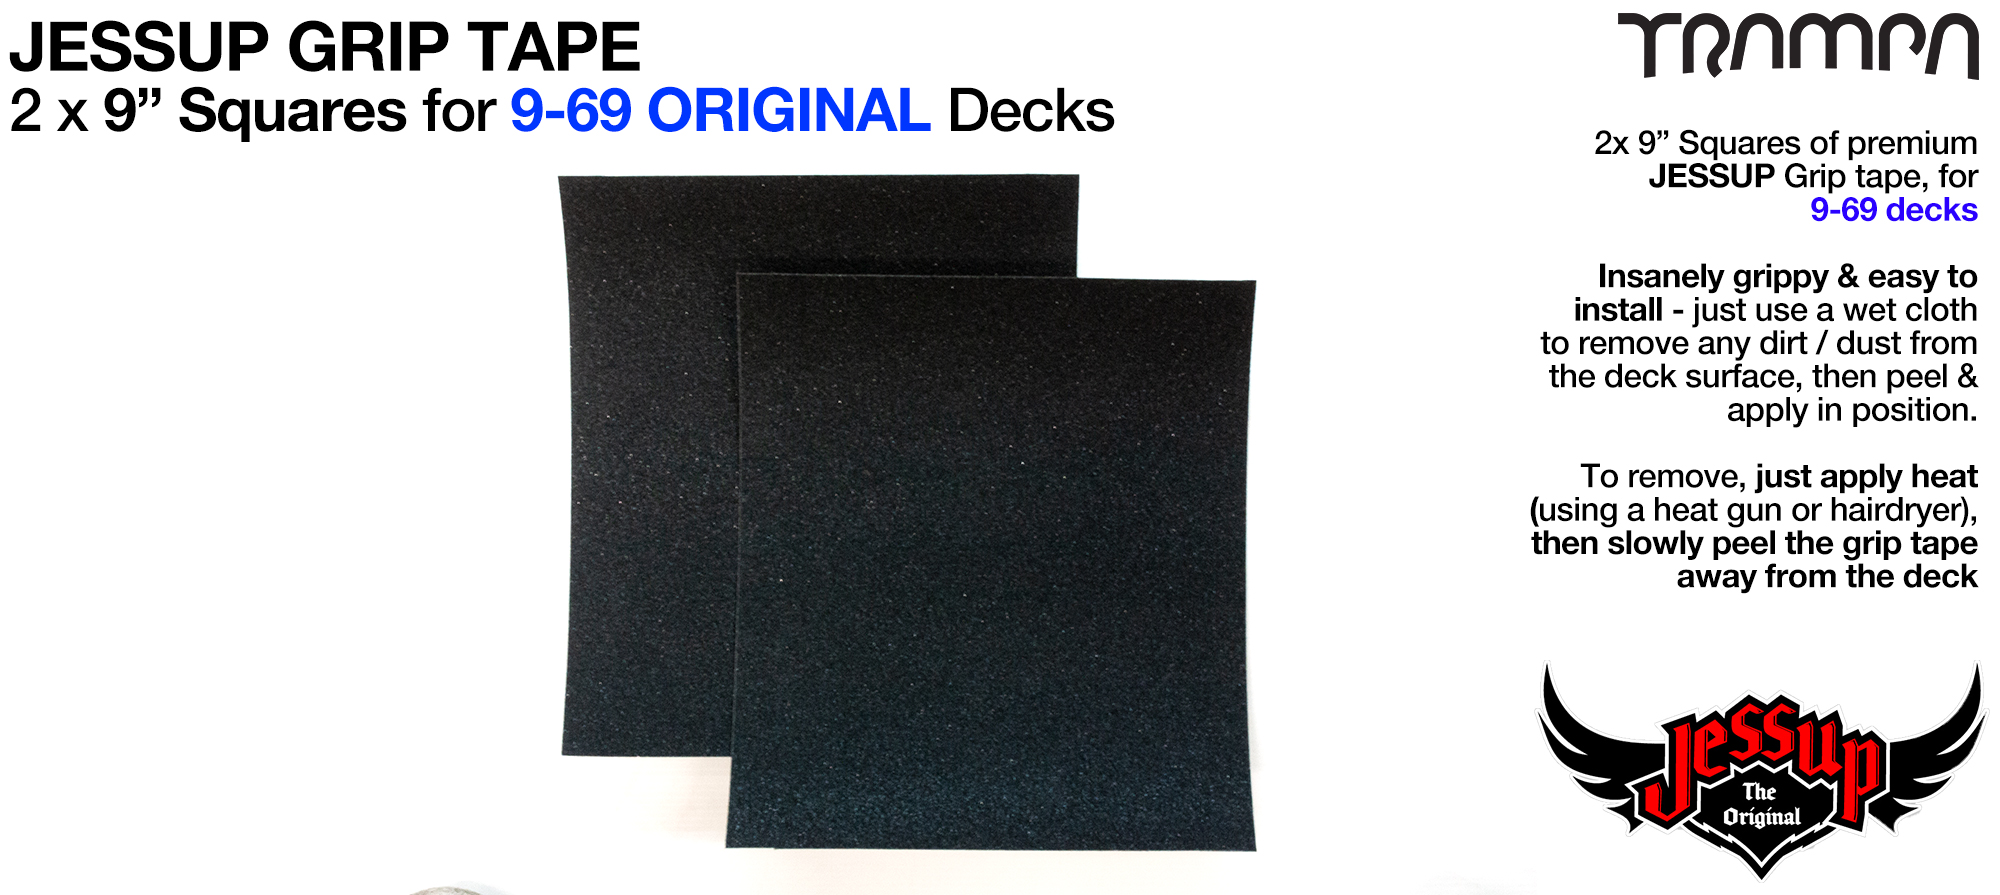 Grip tape - 2 x 9 inch squares for 9-69 Decks - Jessup